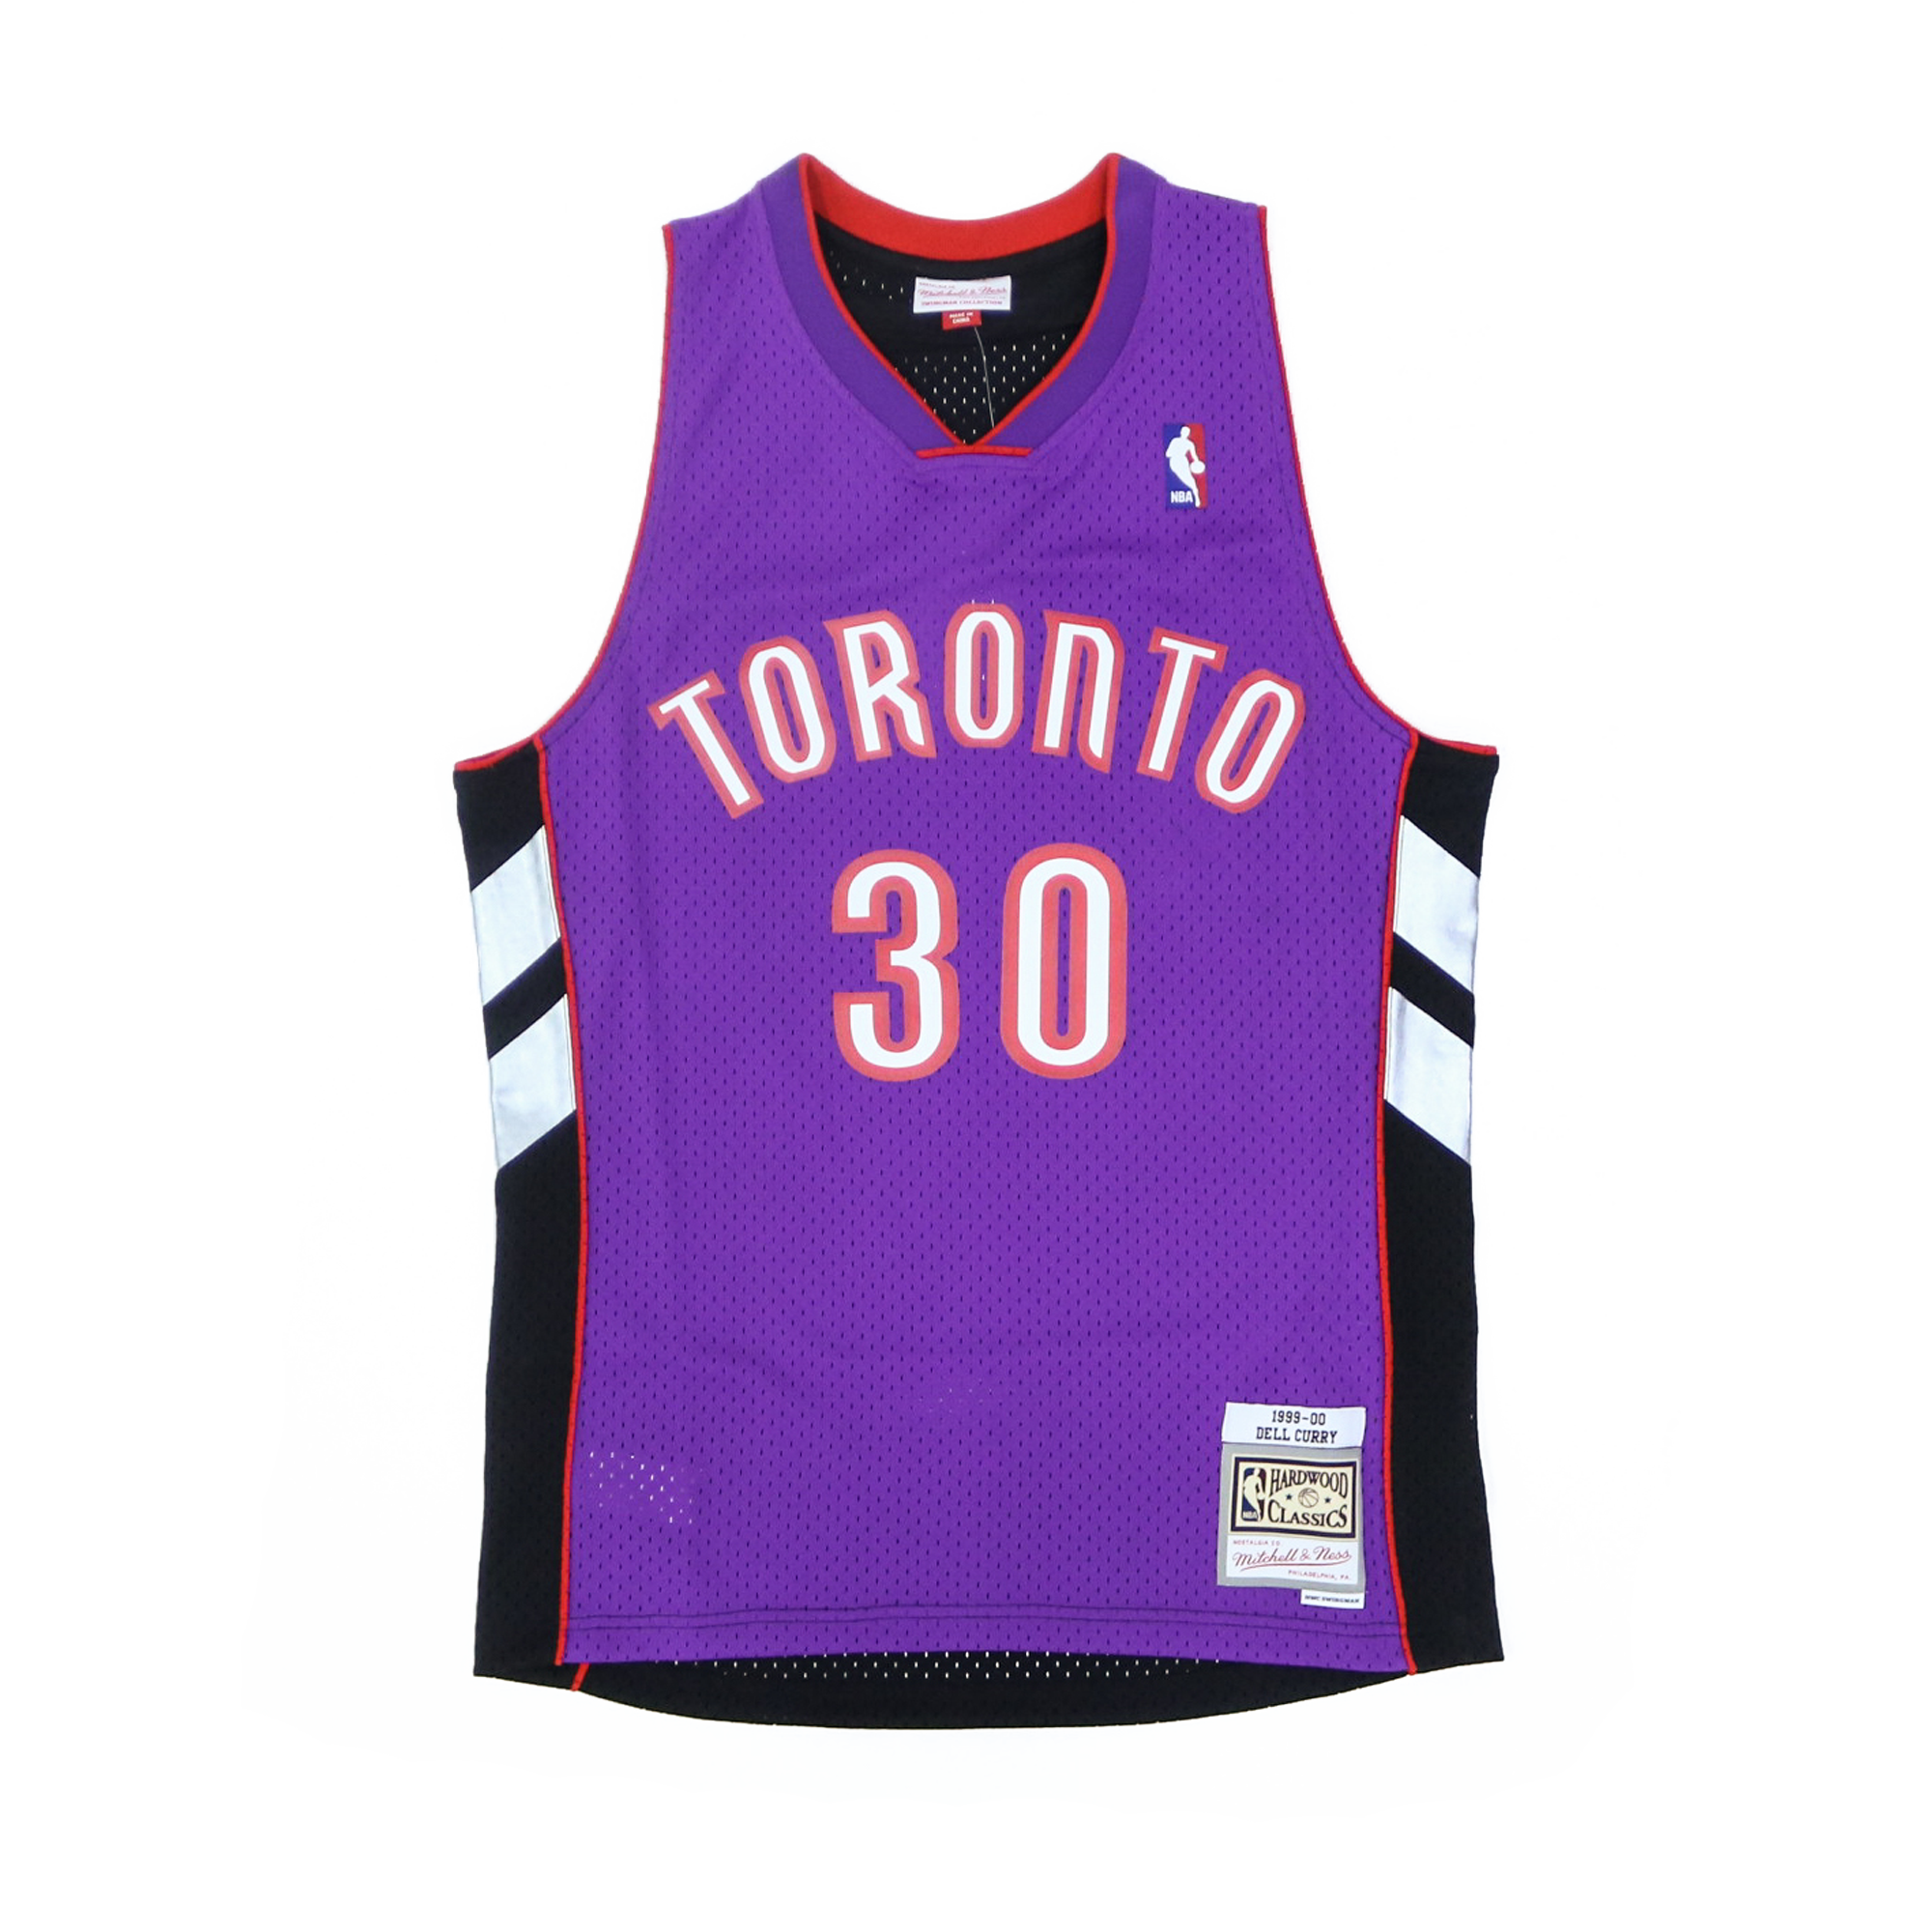 dell curry toronto jersey